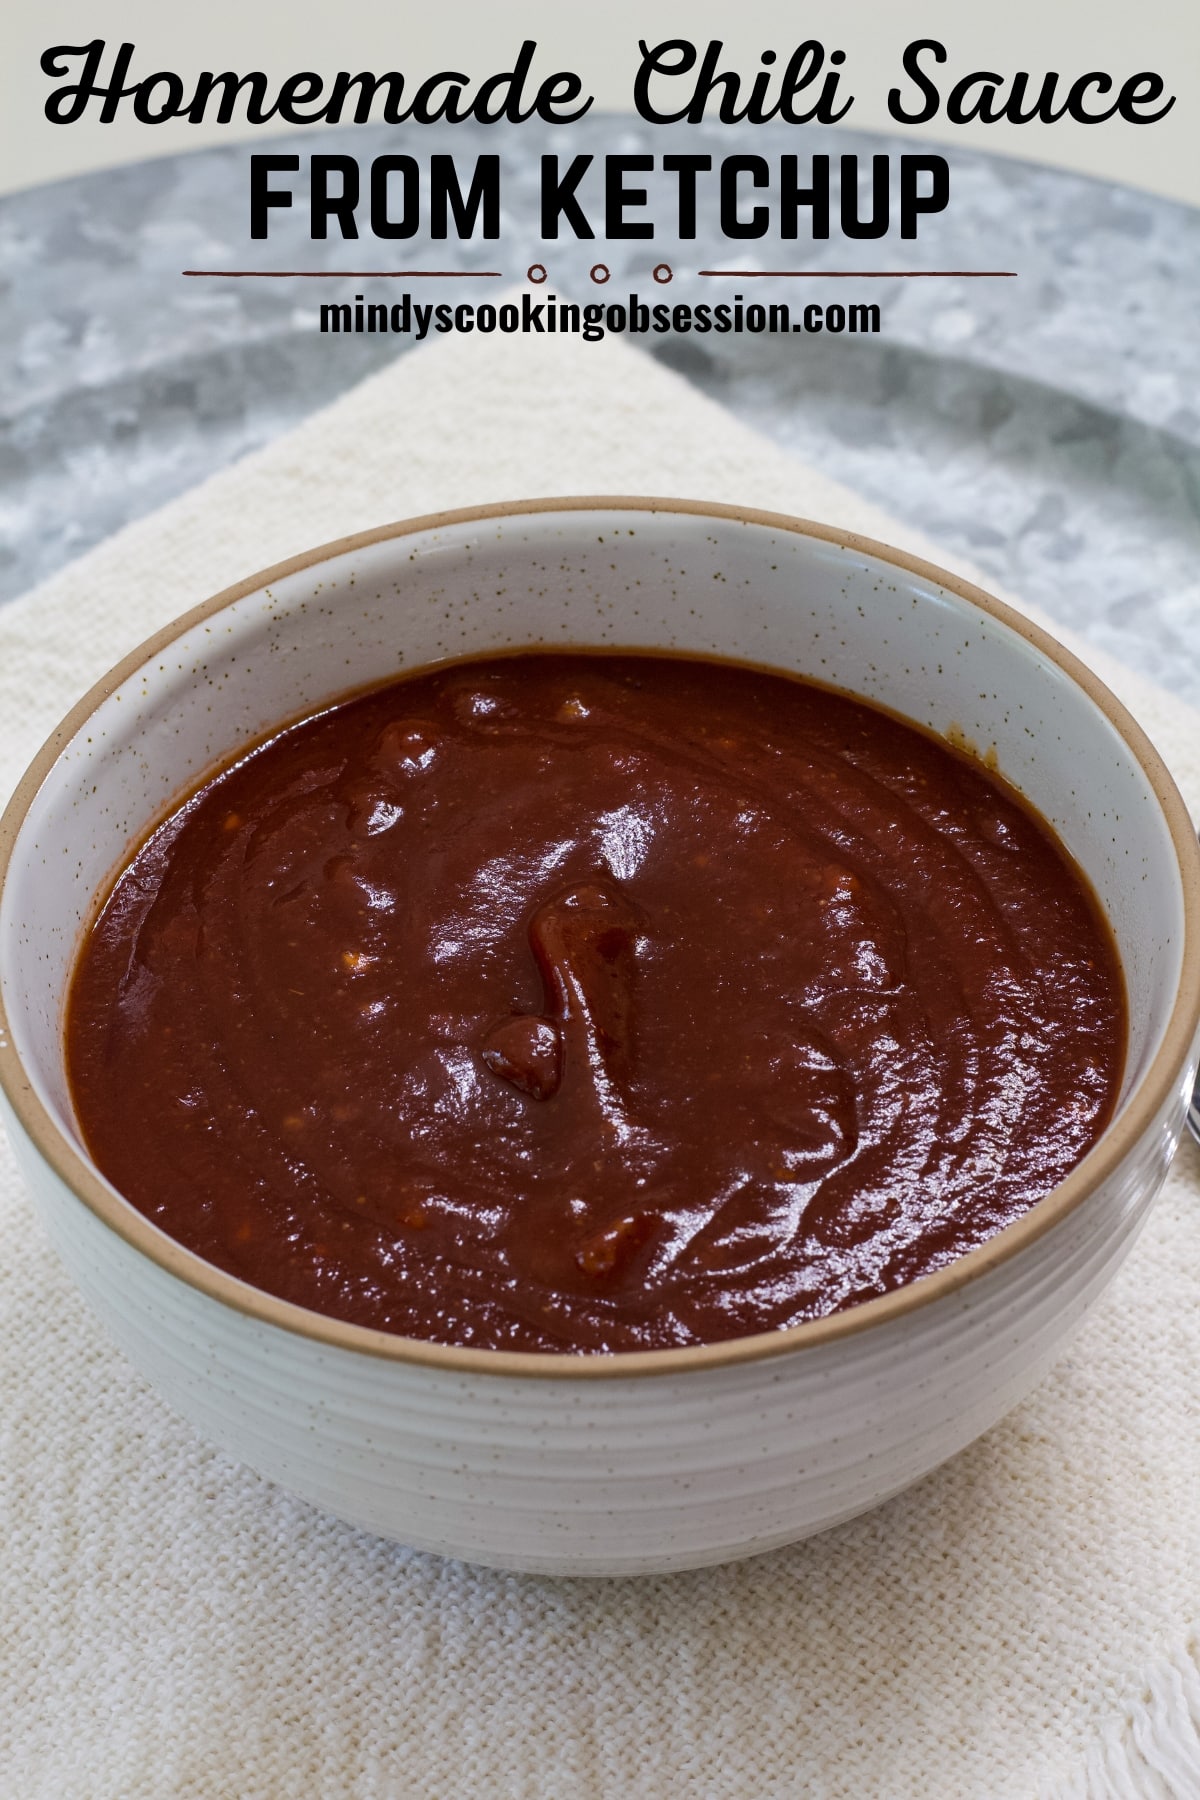 Homemade Chili Sauce Recipe (how to make with ketchup) is great to top hamburgers and hot dogs or as a dipping sauce for shrimp or French fries.  via @mindyscookingobsession